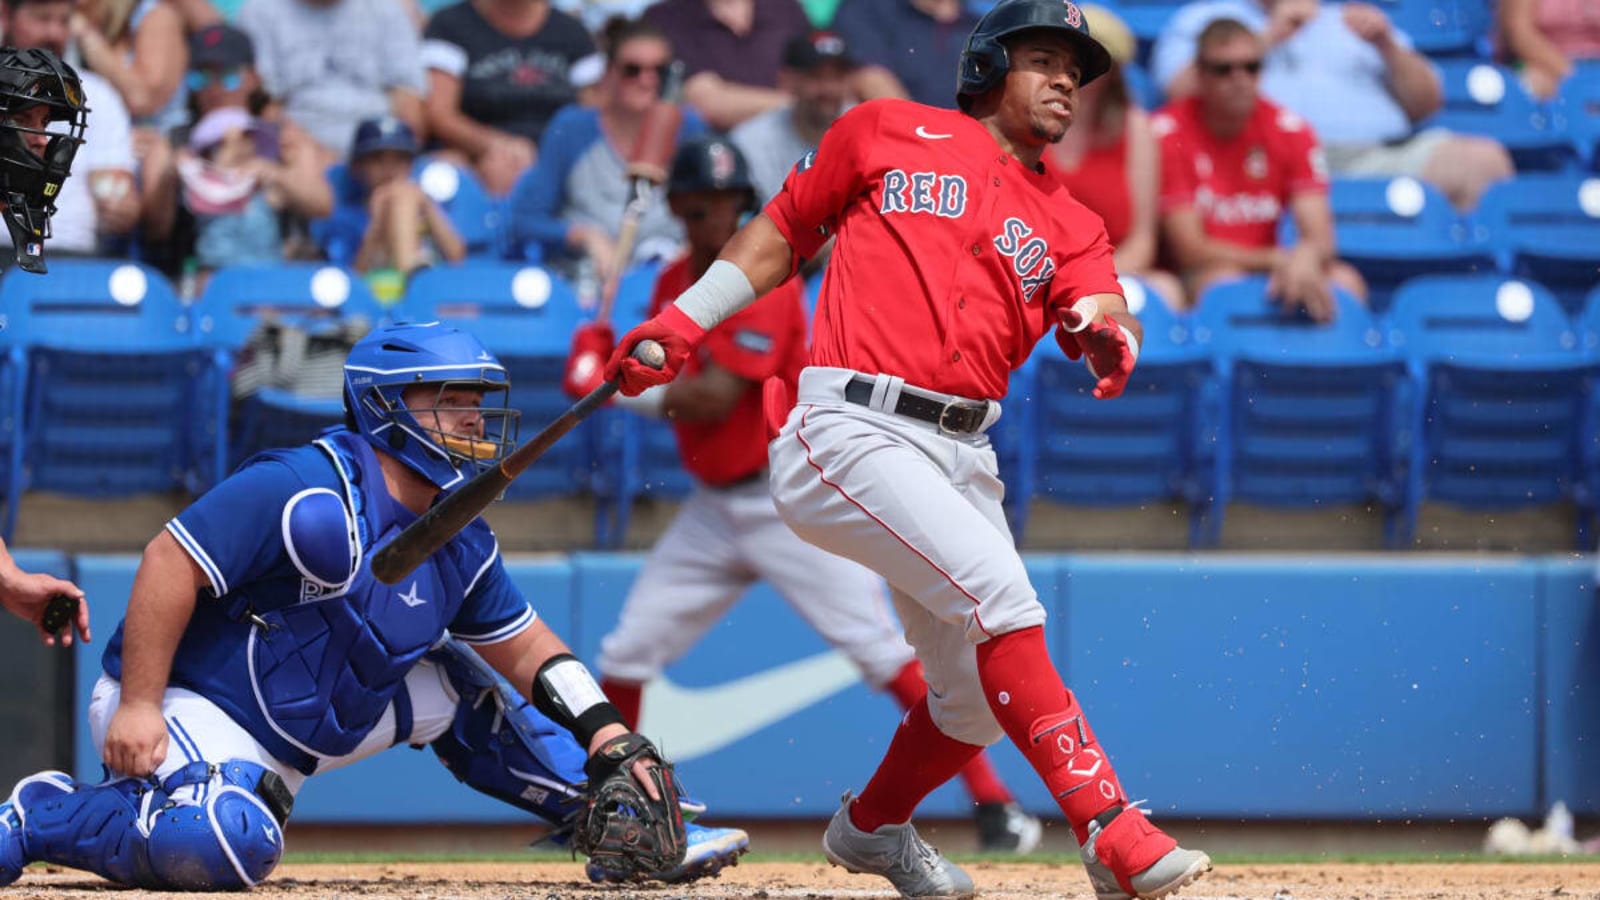 Red Sox Officially Send Electric Prospect To Minor Leagues; Will We See Him In Boston Soon?